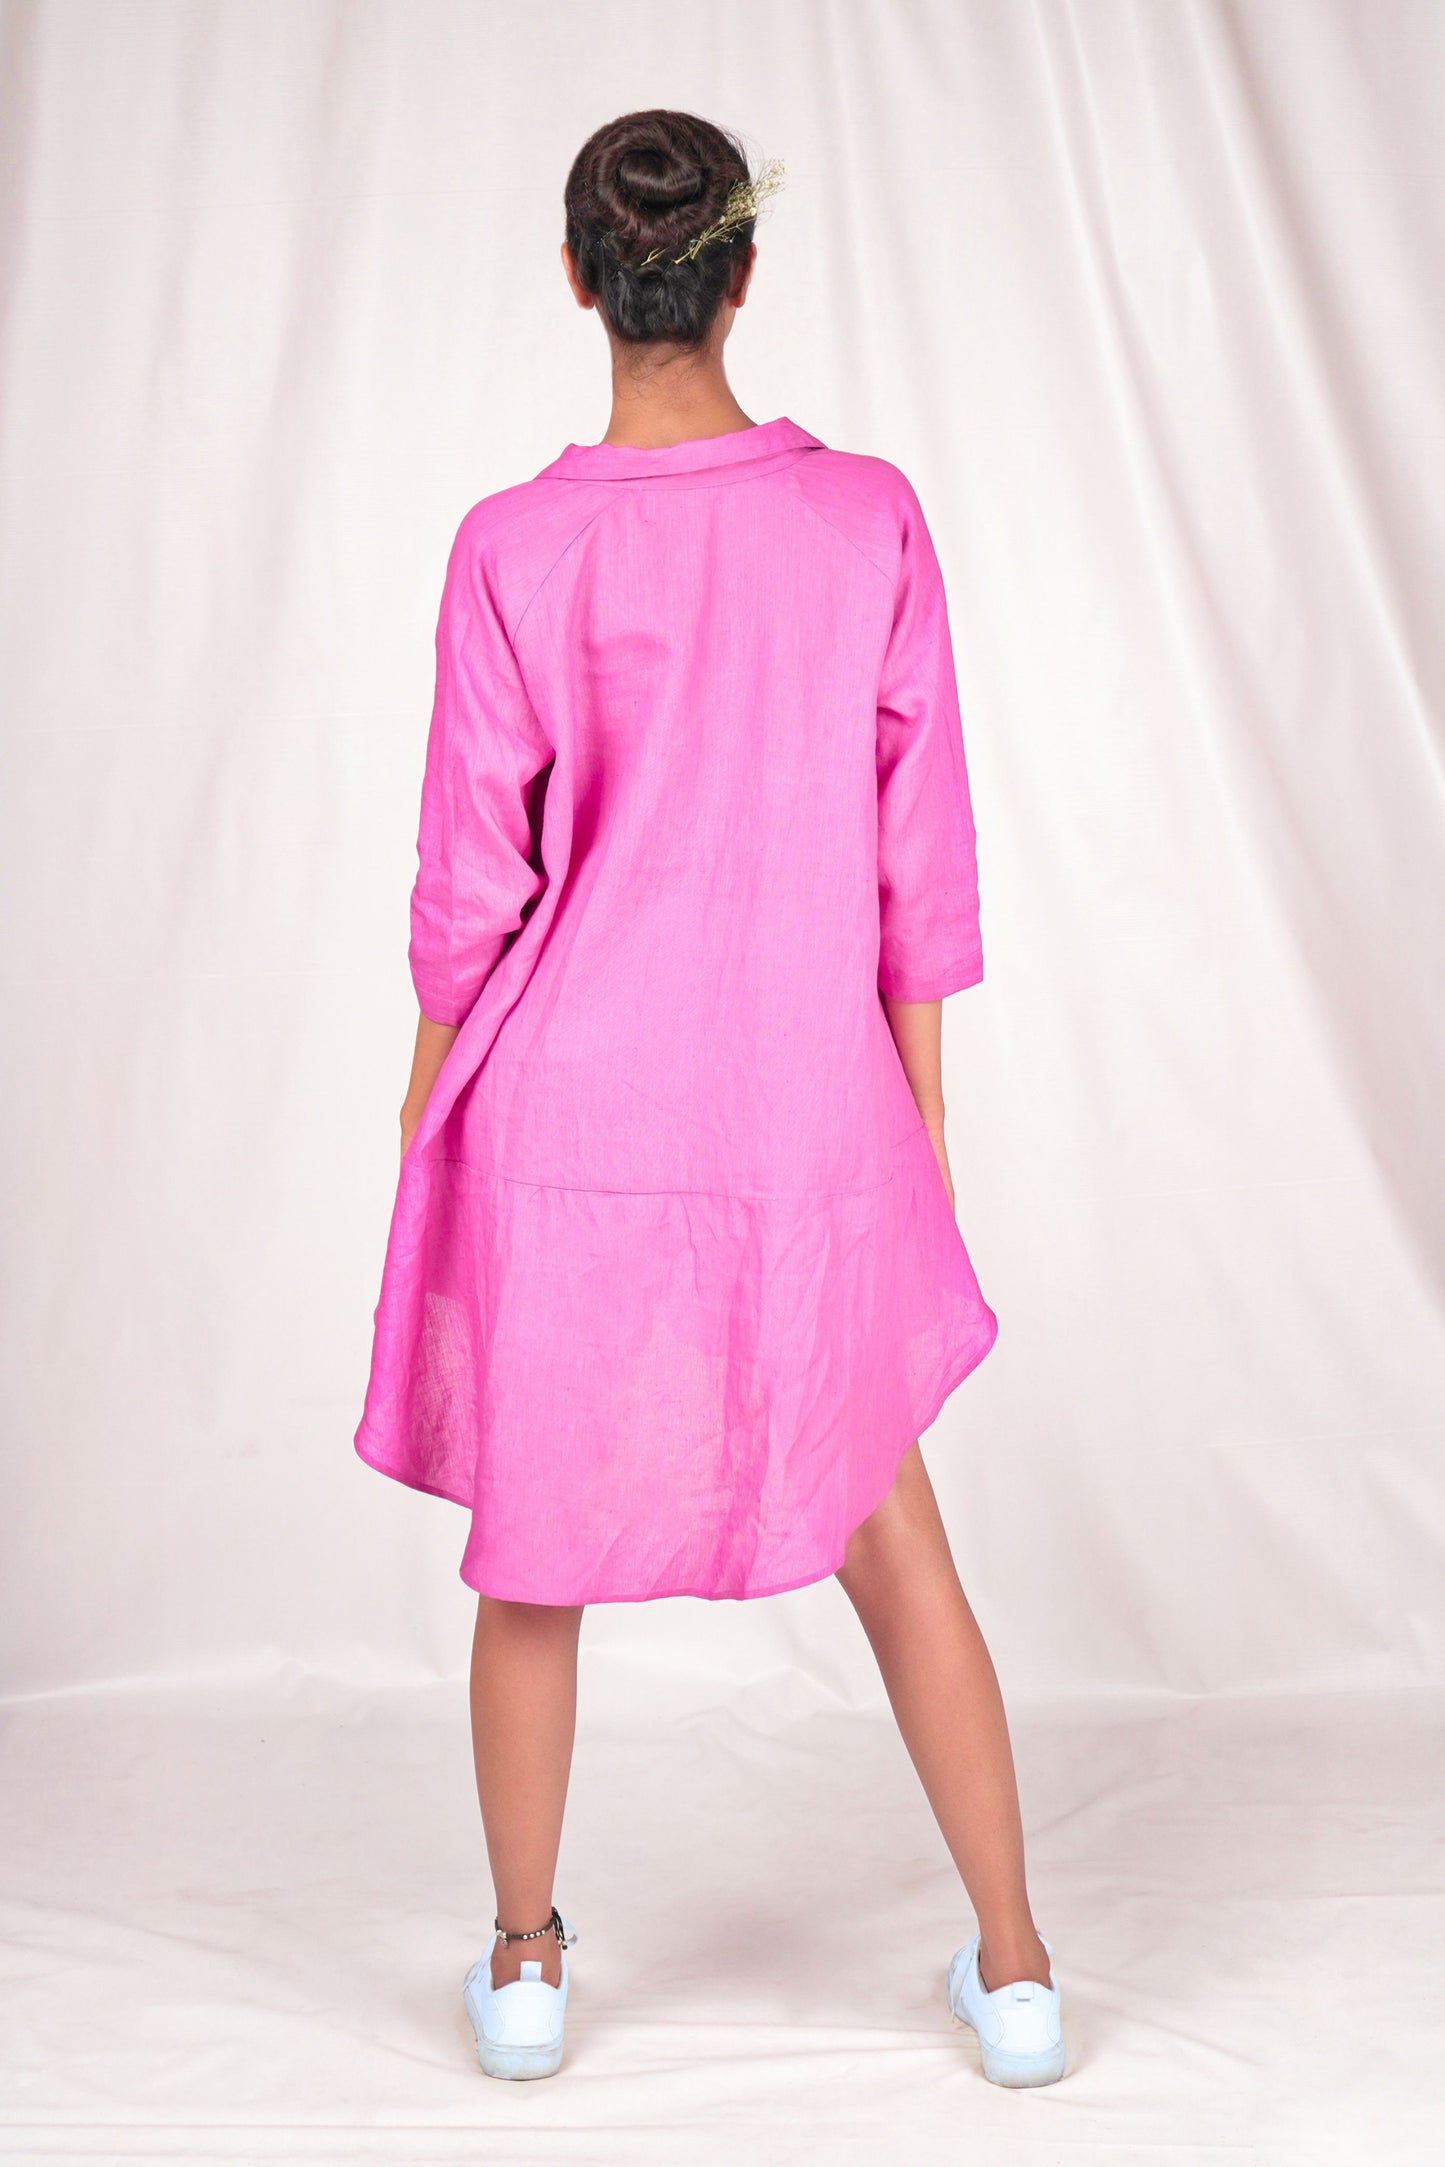 Pink Asymmetrical Overshirt with Embroidery Details